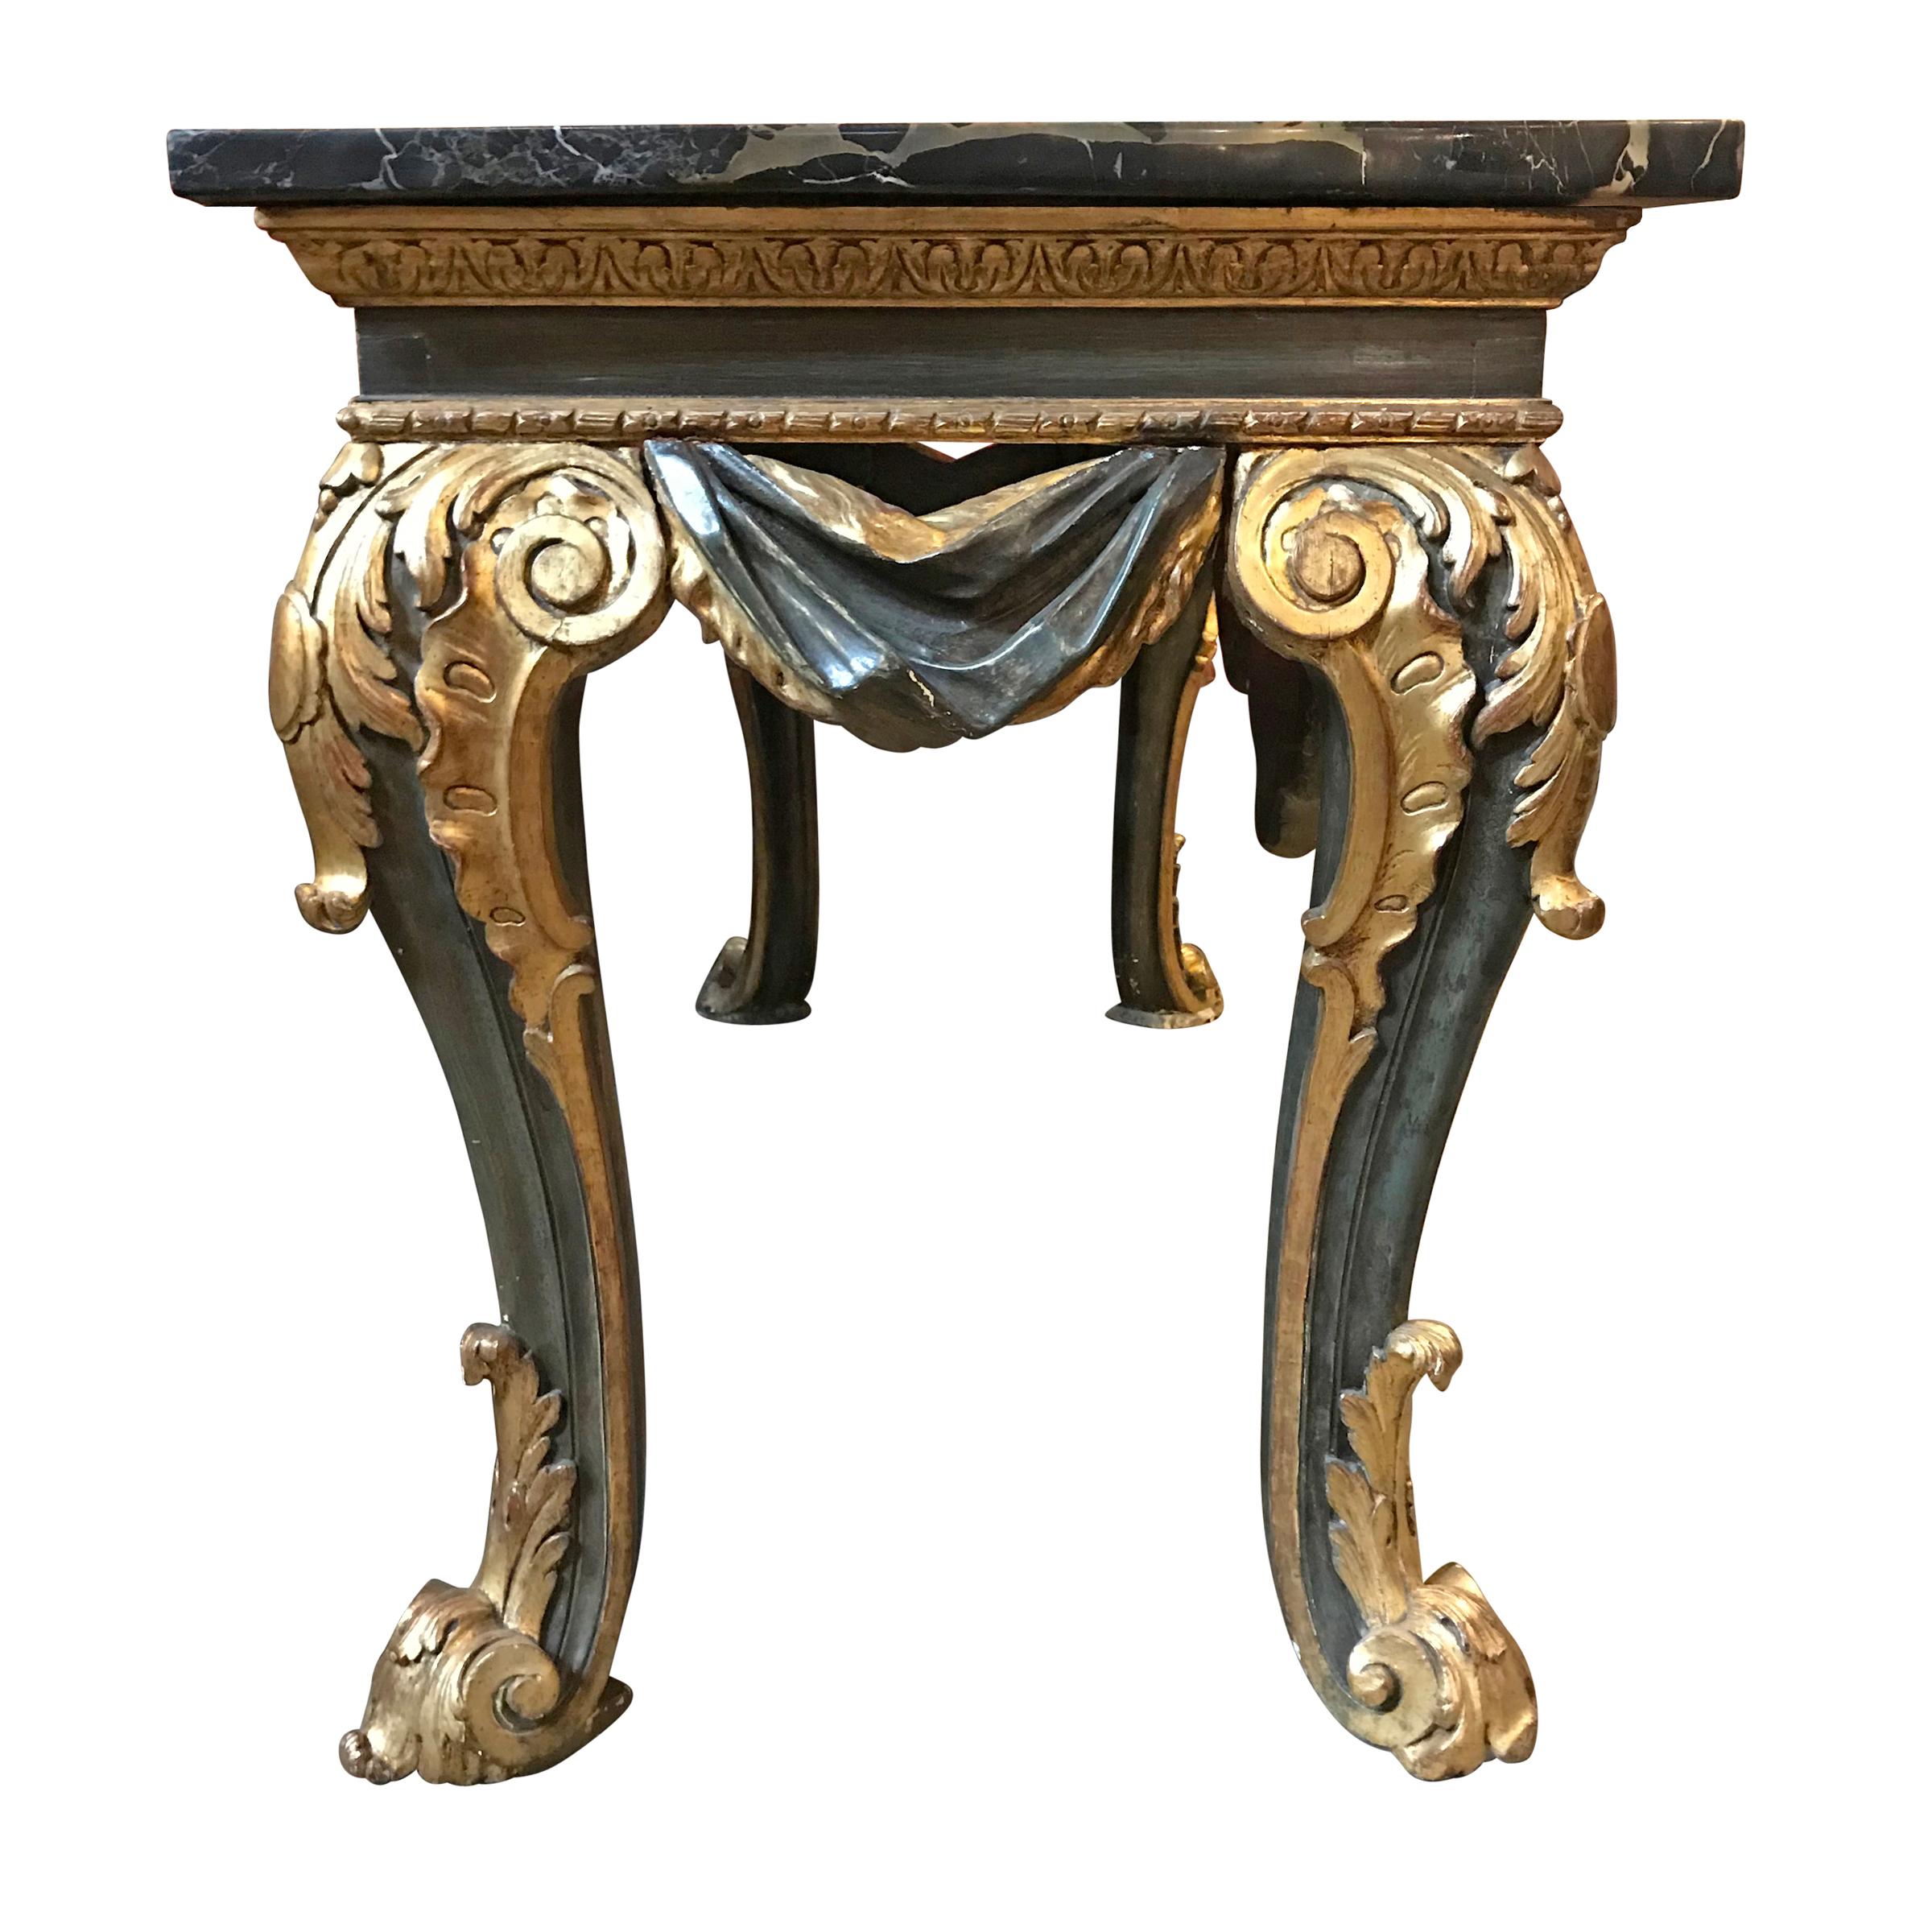 Painted Grande 19th Century Italian Marble-Top Console Table